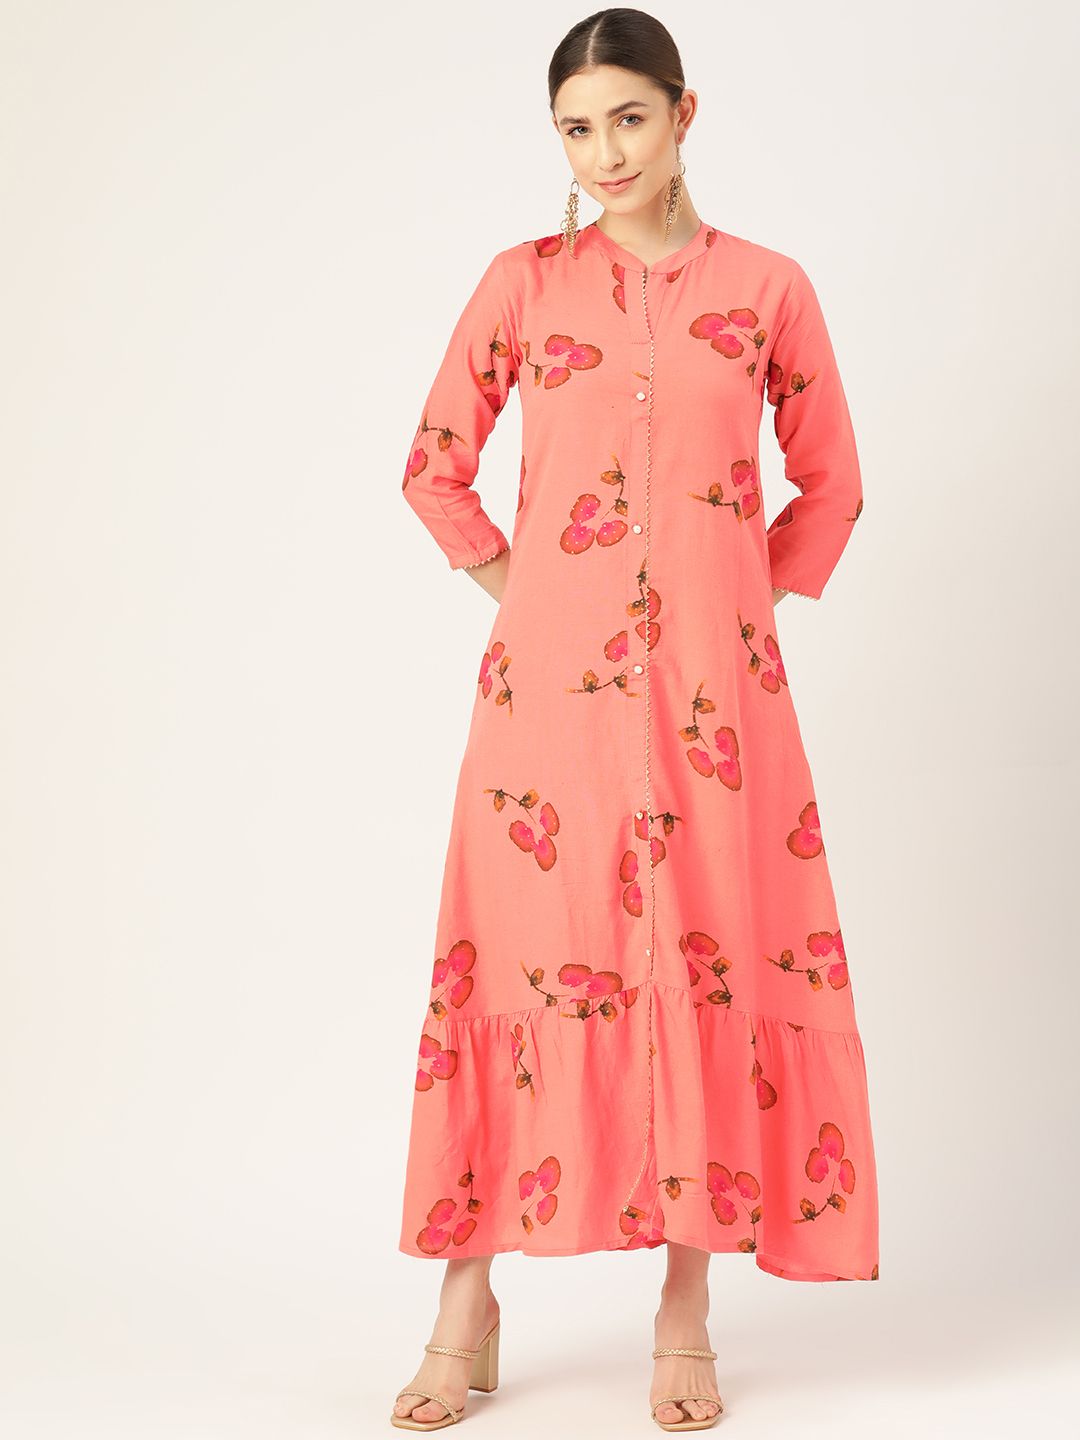 VAABA Coral Pink Floral Ethnic Maxi Dress Price in India